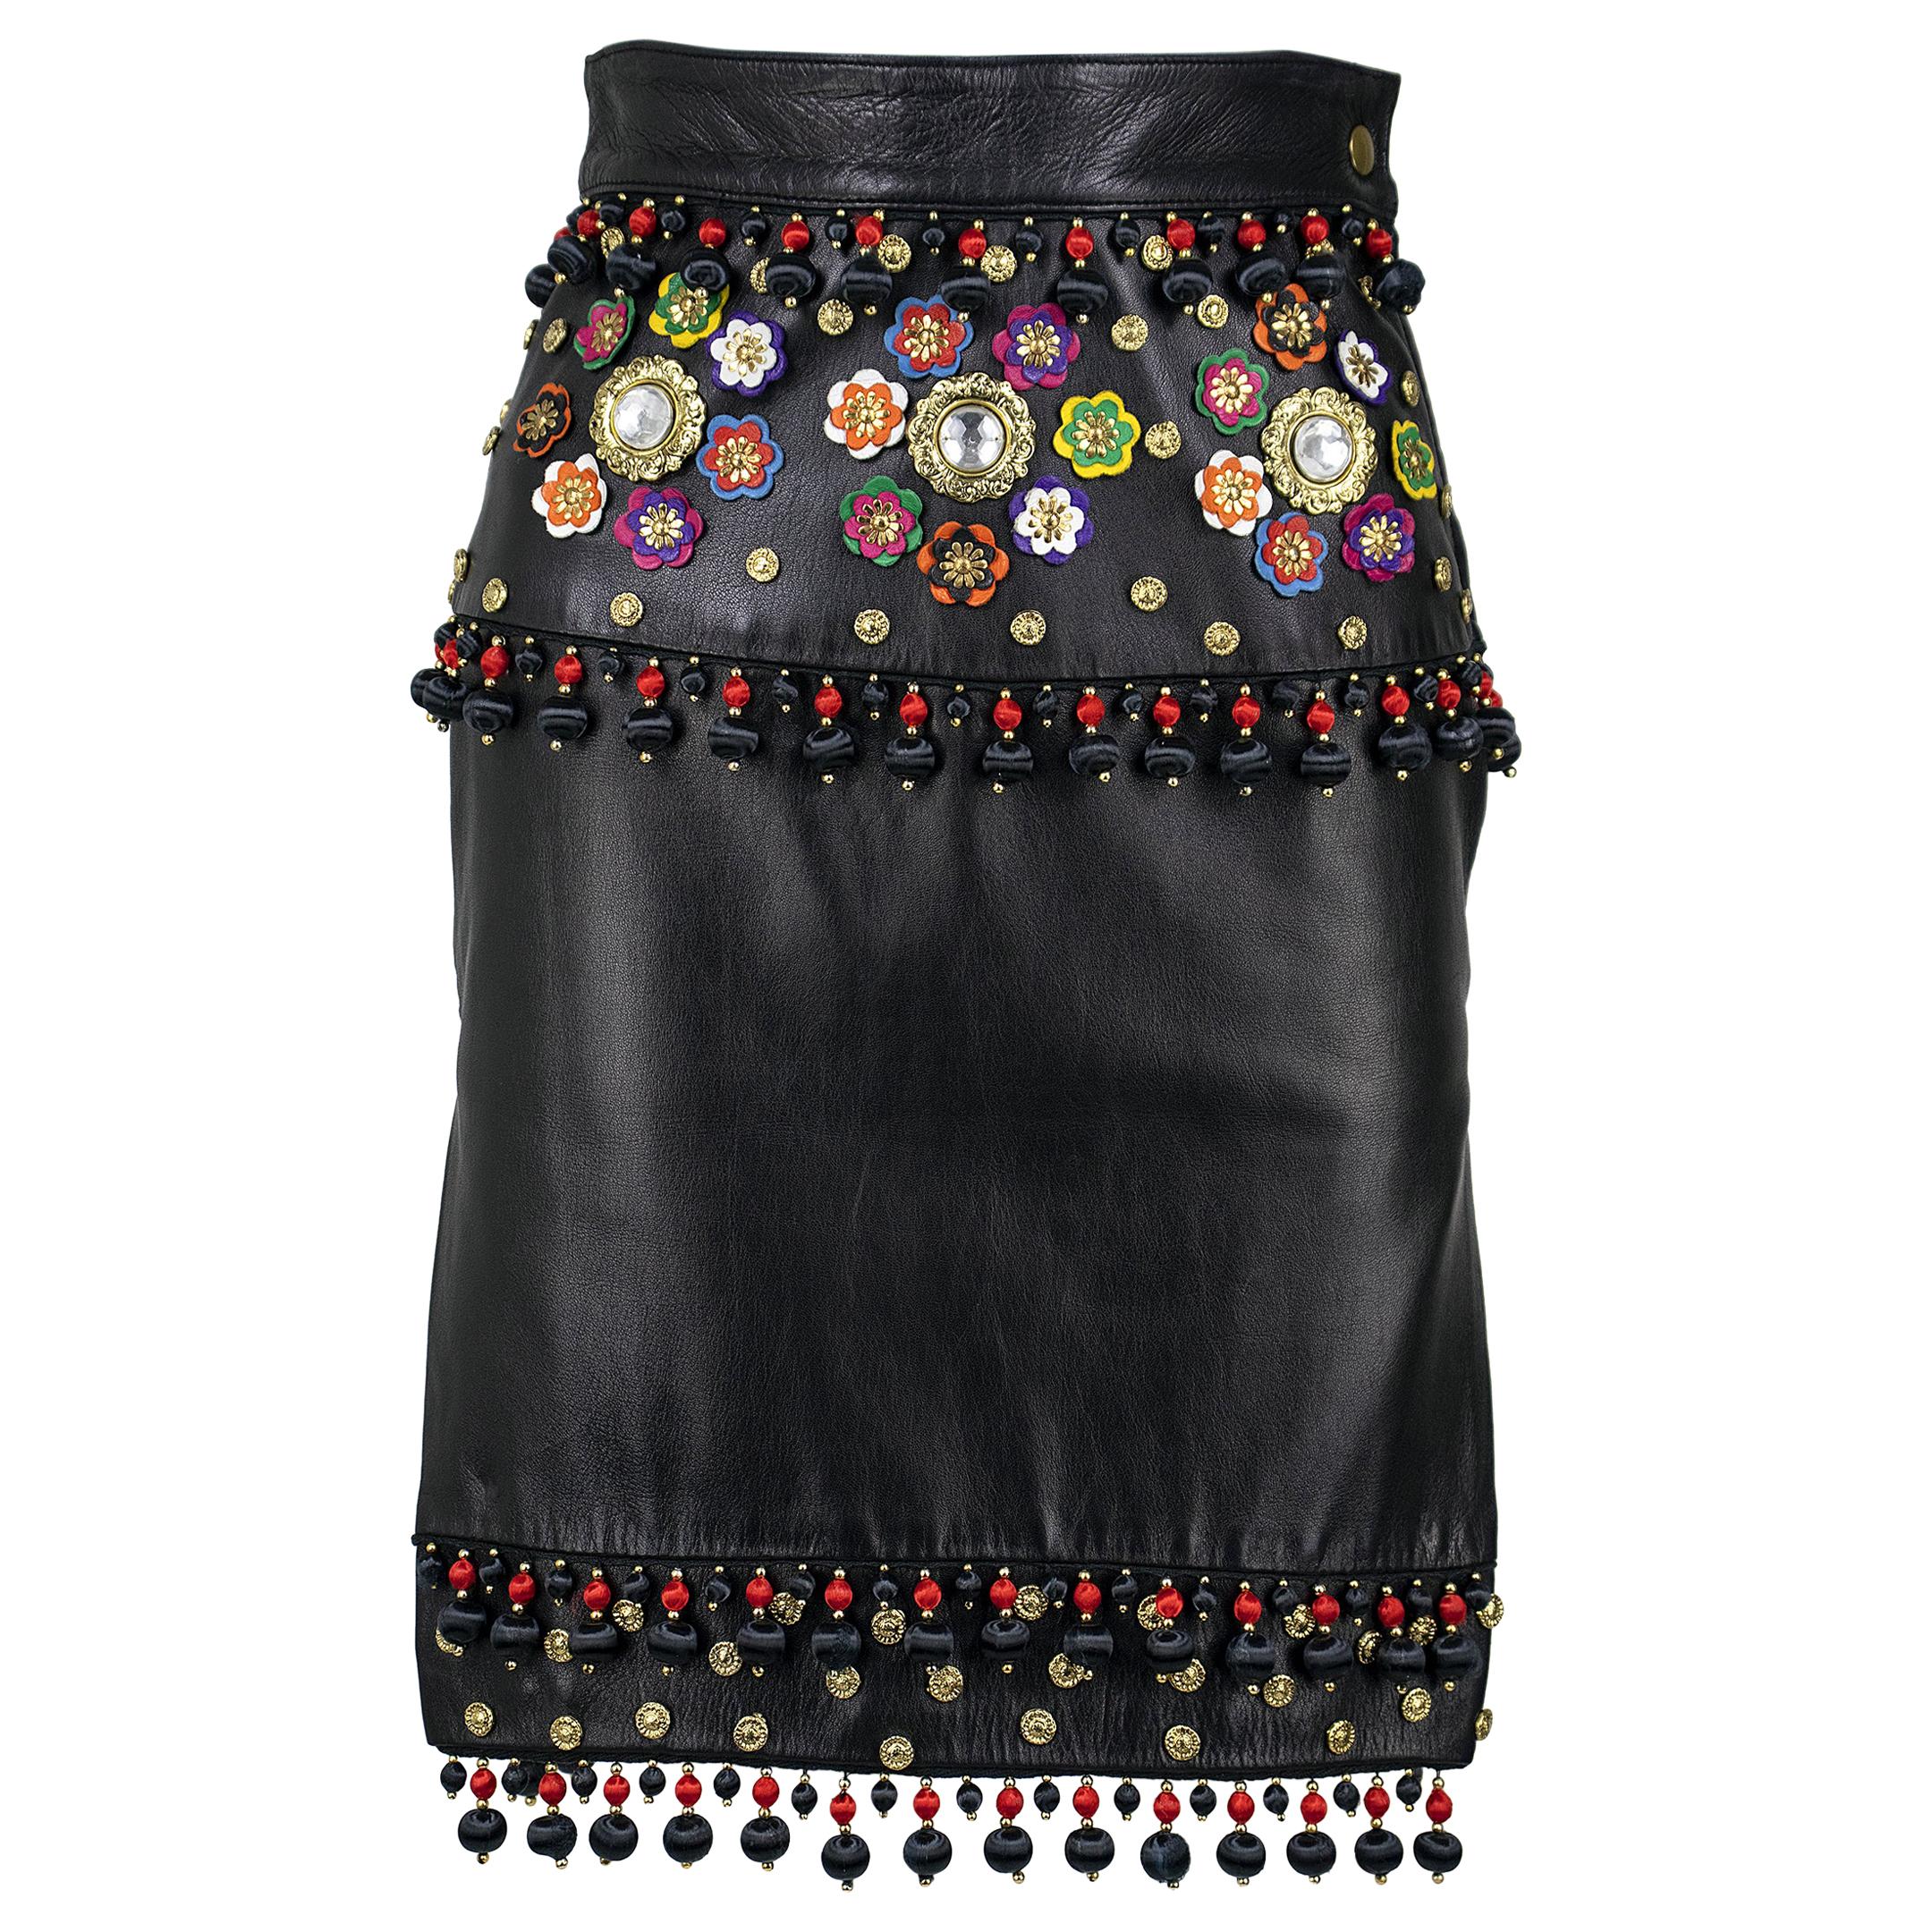 Moschino Circa 1990s Black Leather Skirt with Tassels, Metal Studs and Flowers For Sale